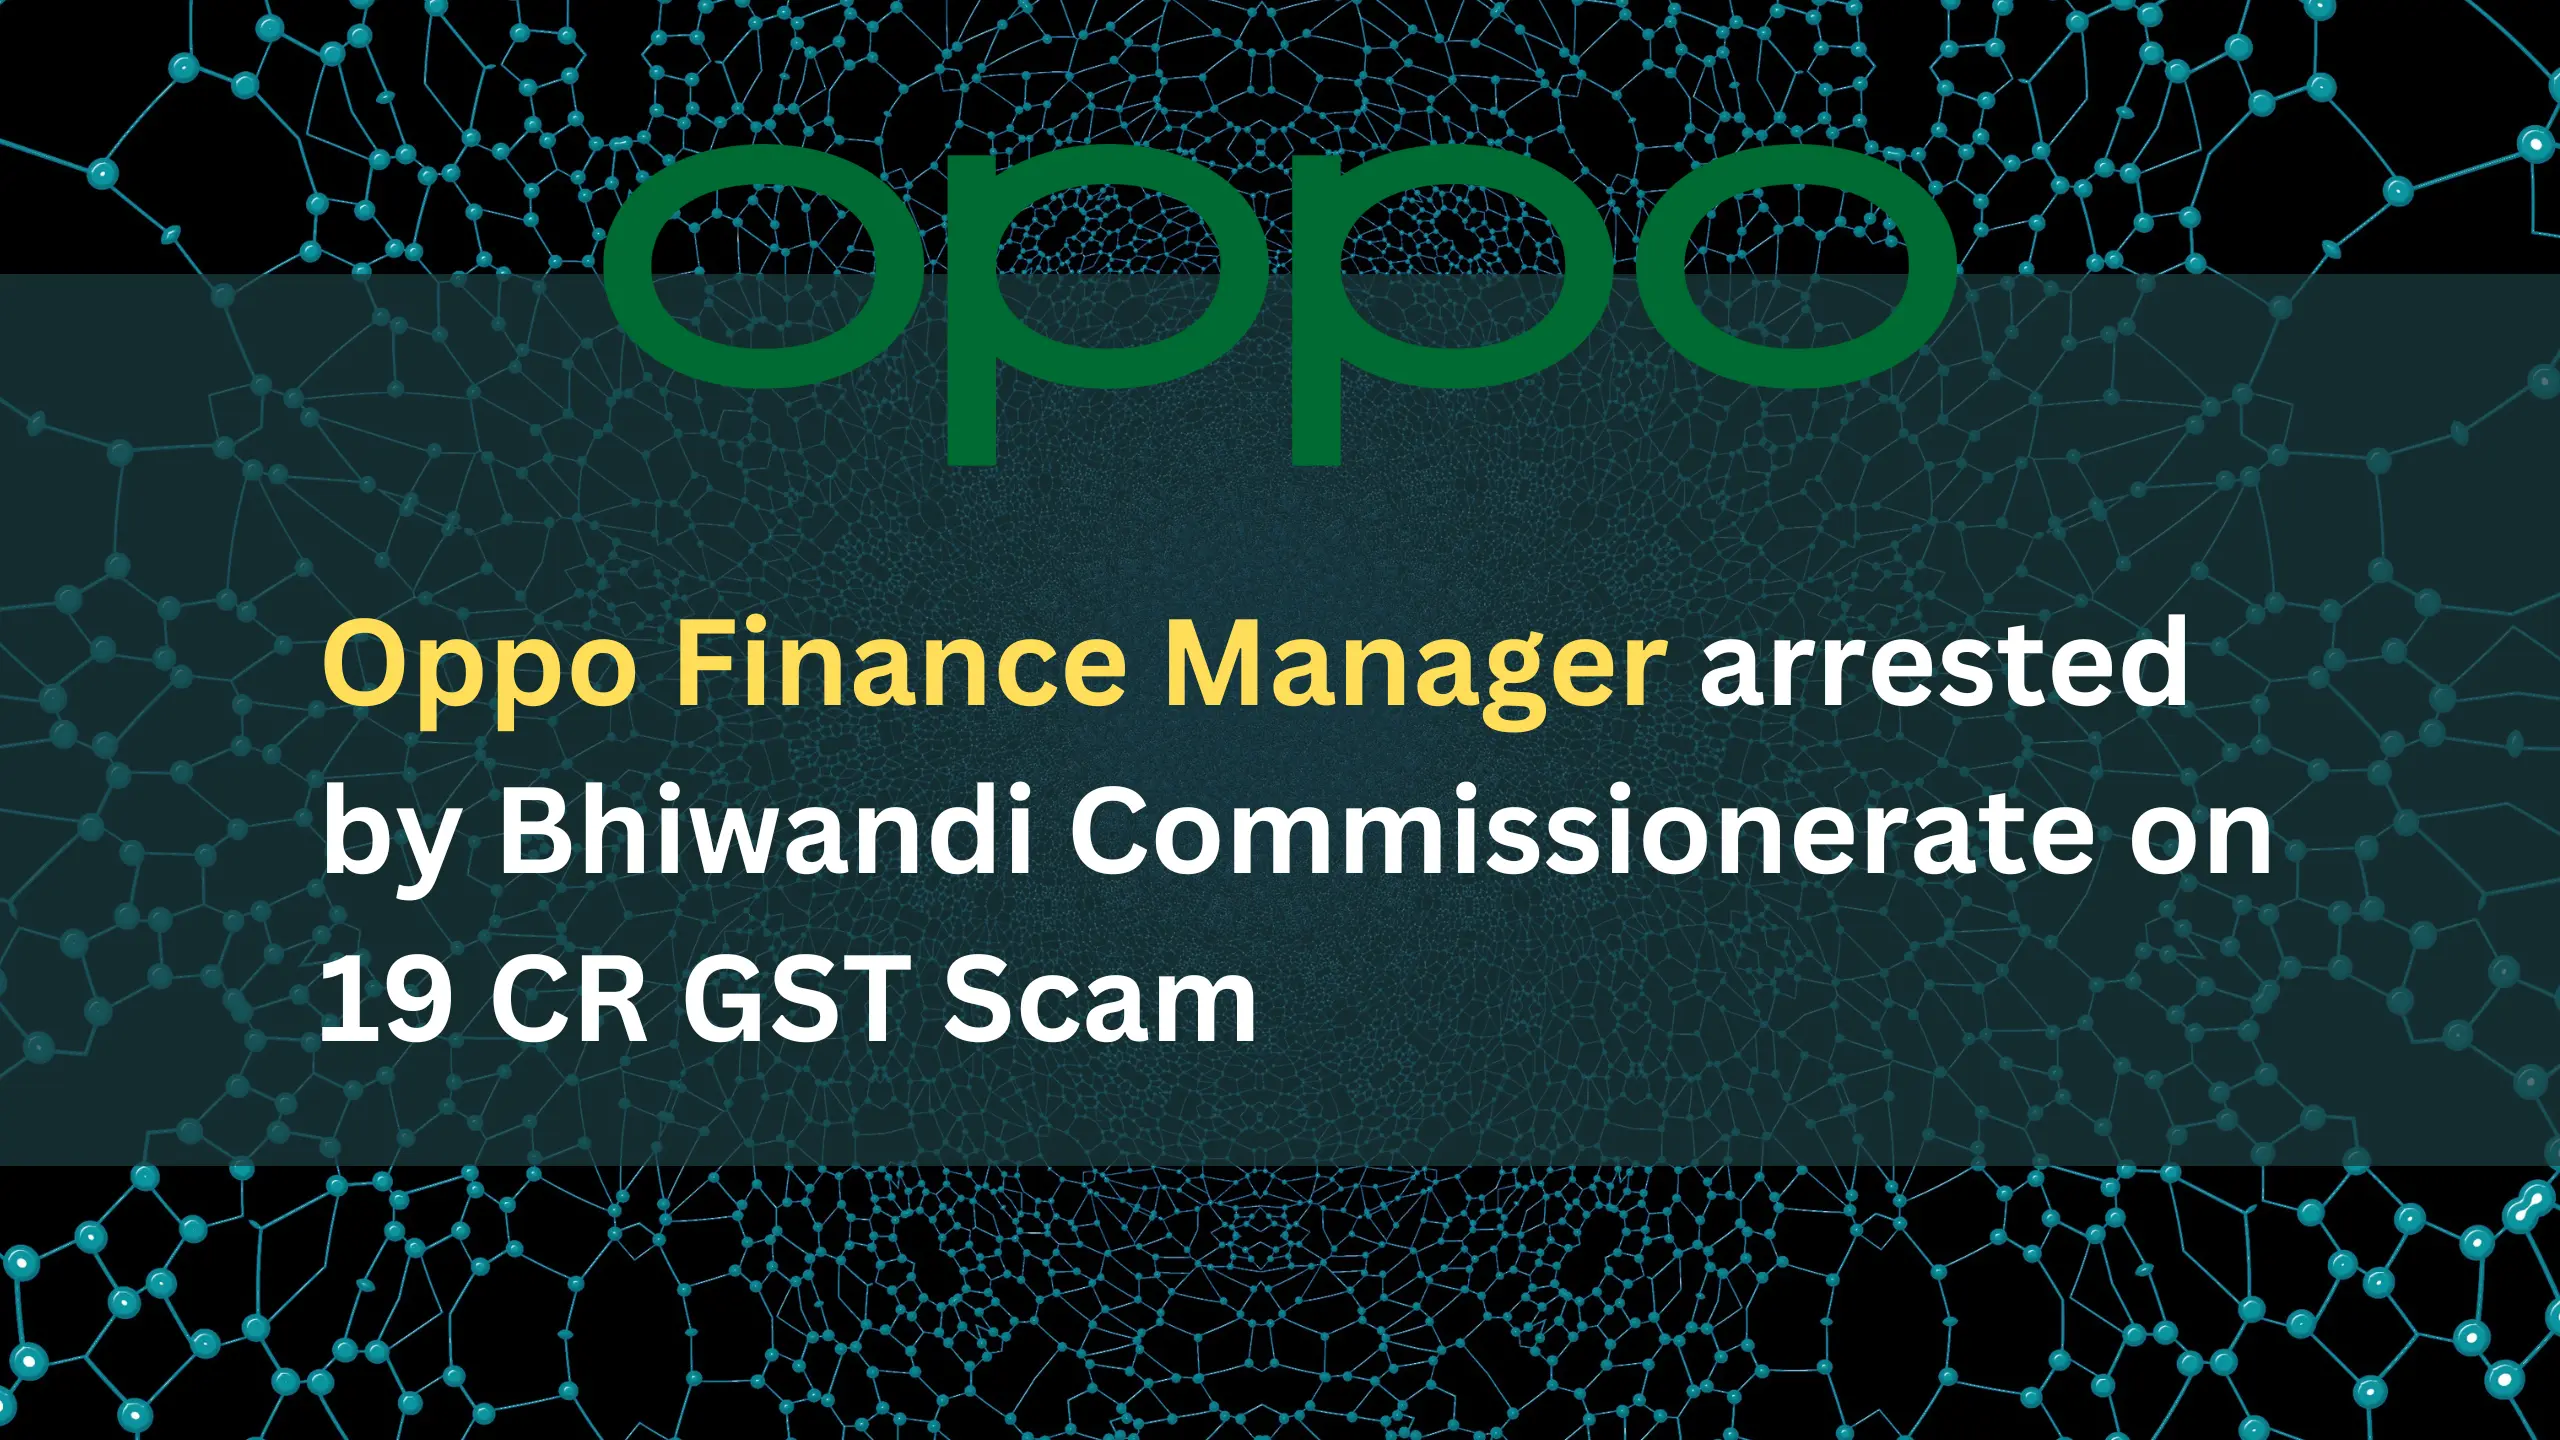 OPPO Finance Manager Arrested By Bhiwandi Commissionerate On 19 Crore GST ITC Fraud